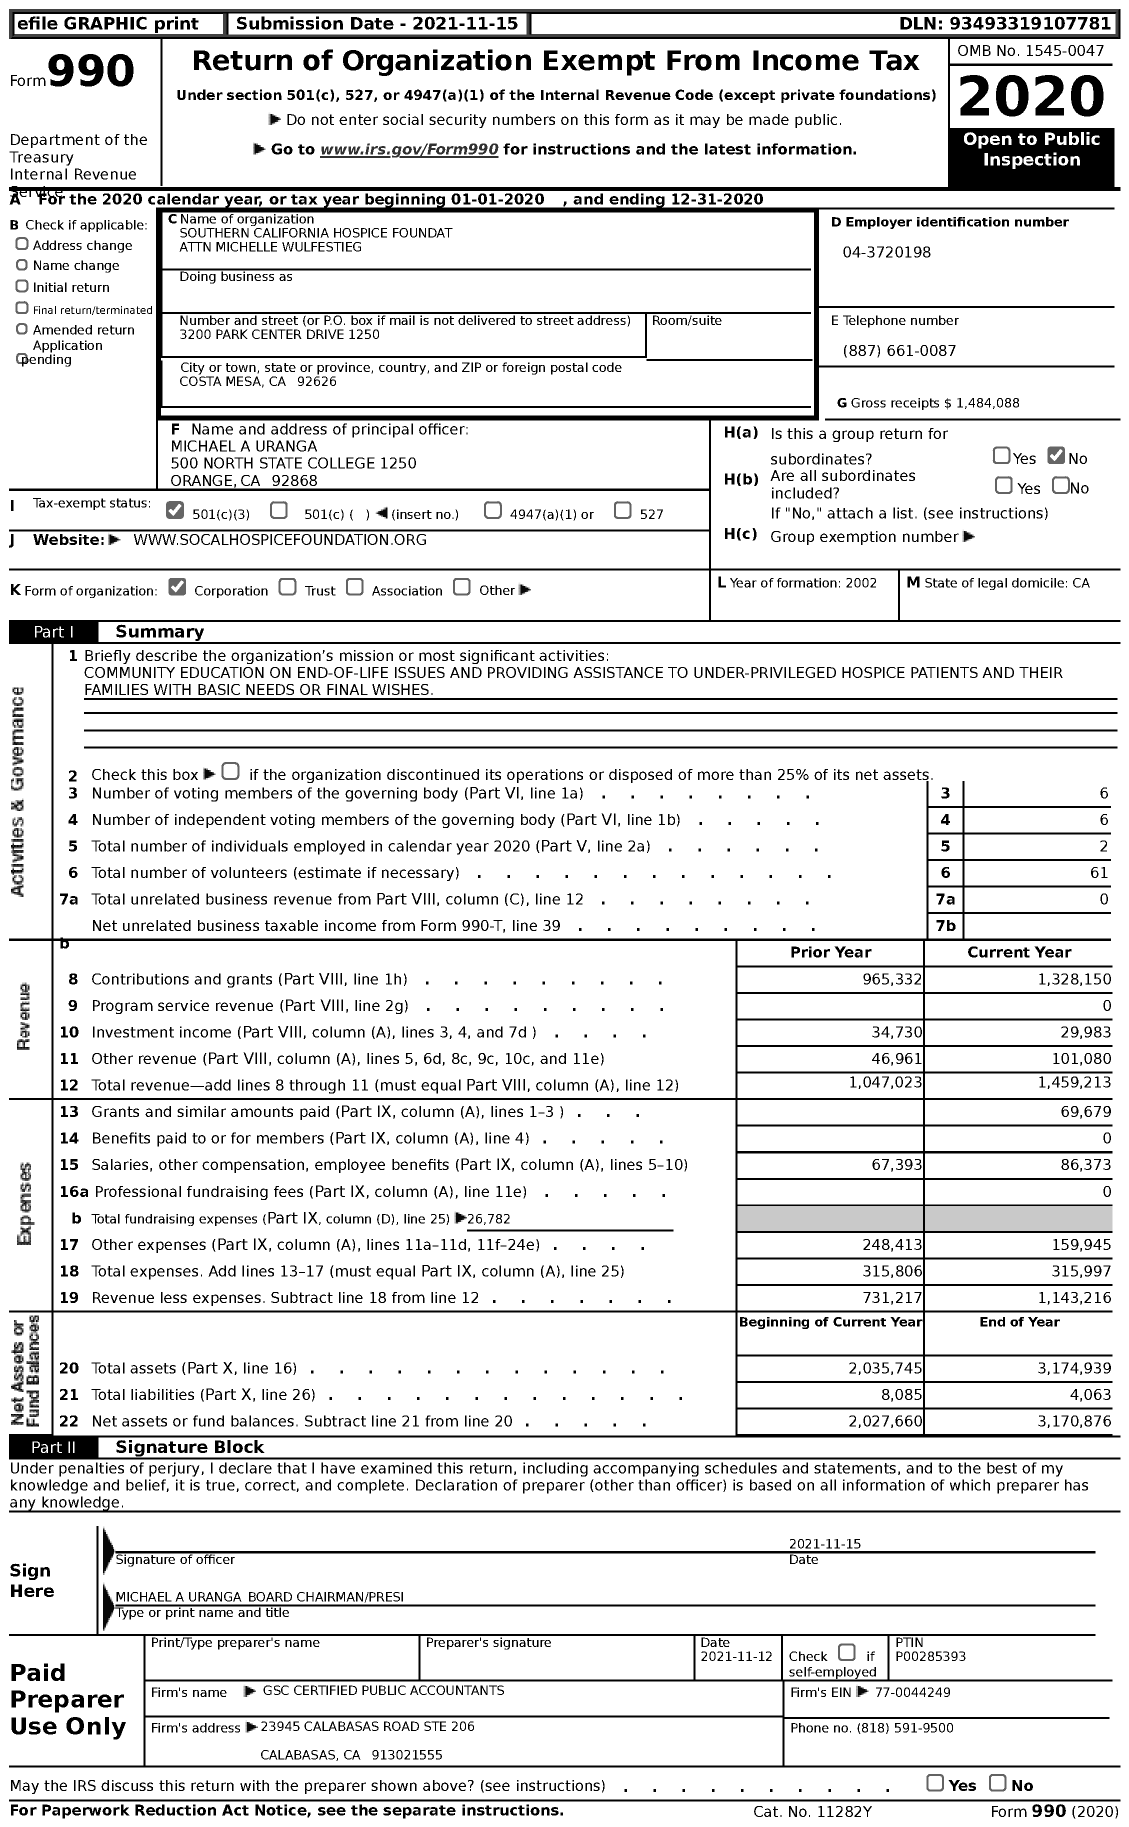 Image of first page of 2020 Form 990 for Southern California Hospice Foundat Attn Michelle Wulfestieg